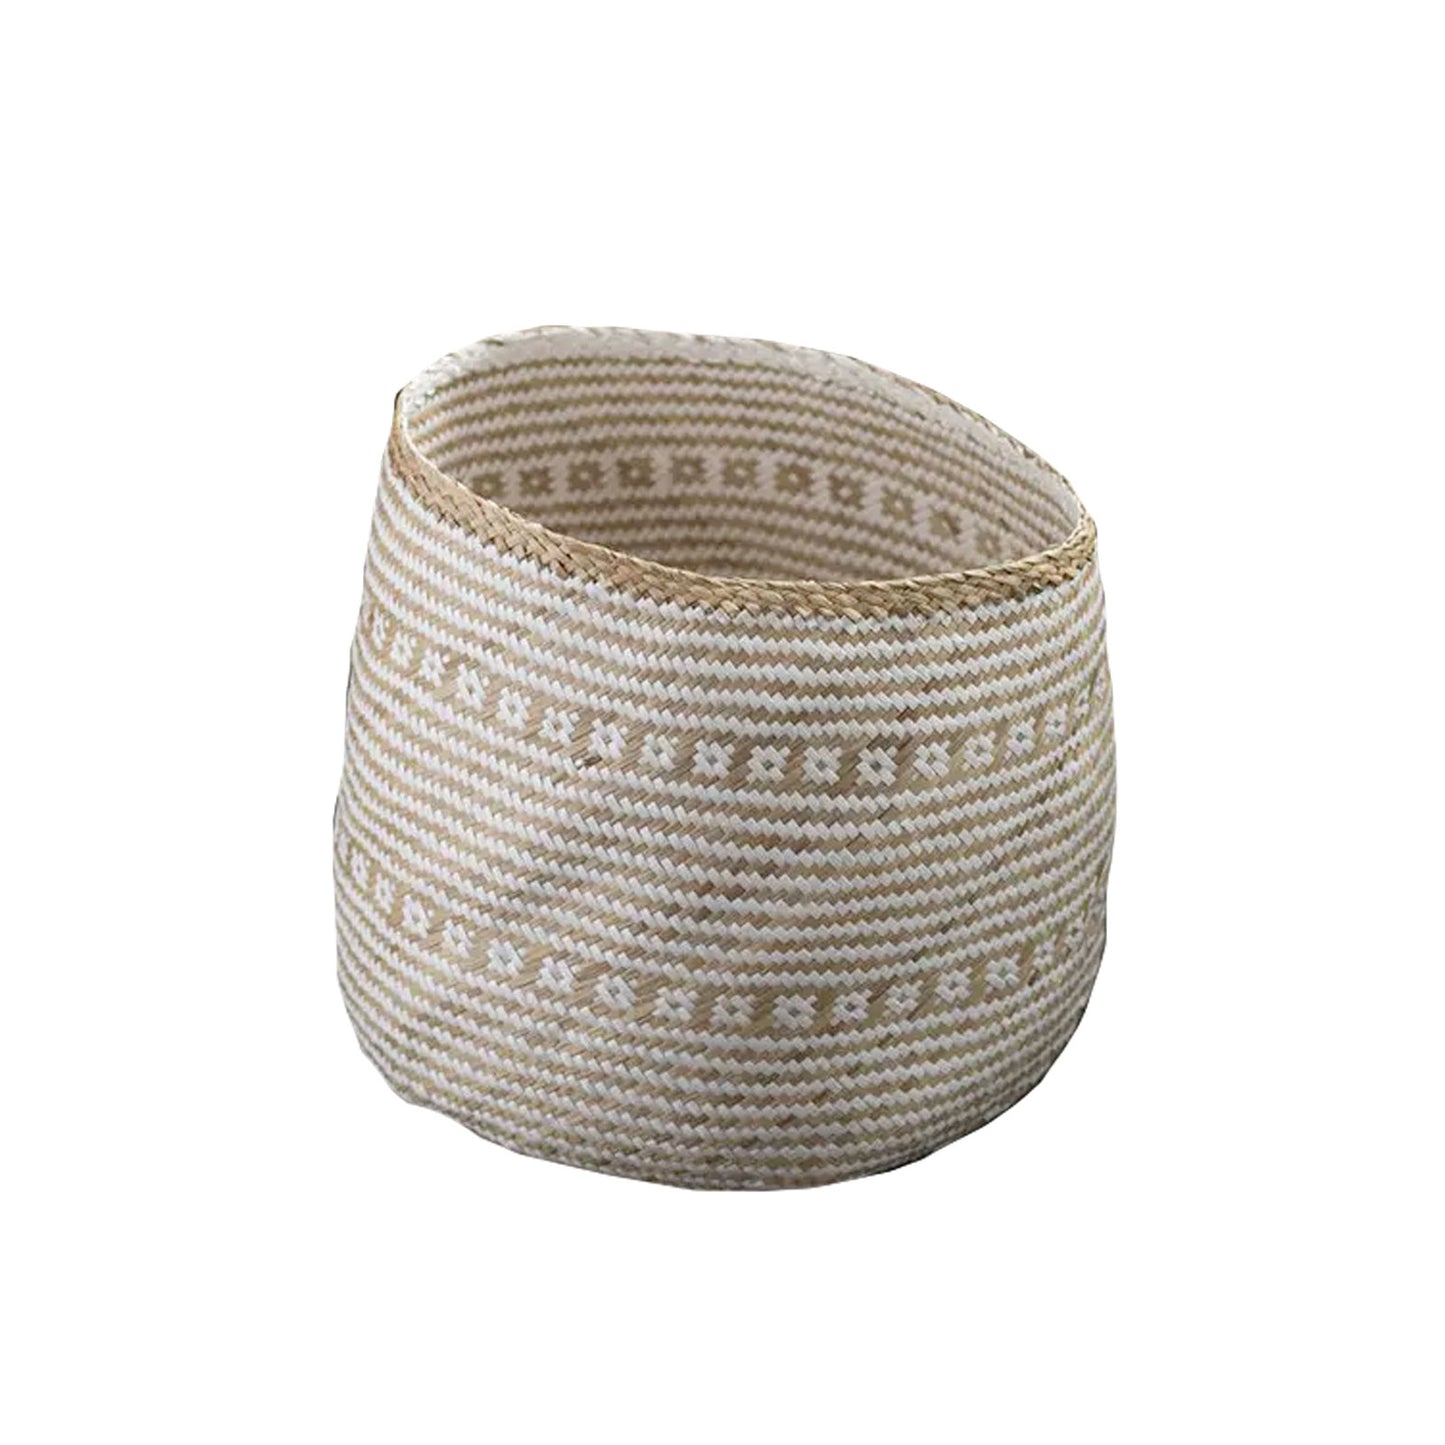 Handwoven Basket in White & Natural Seagrass